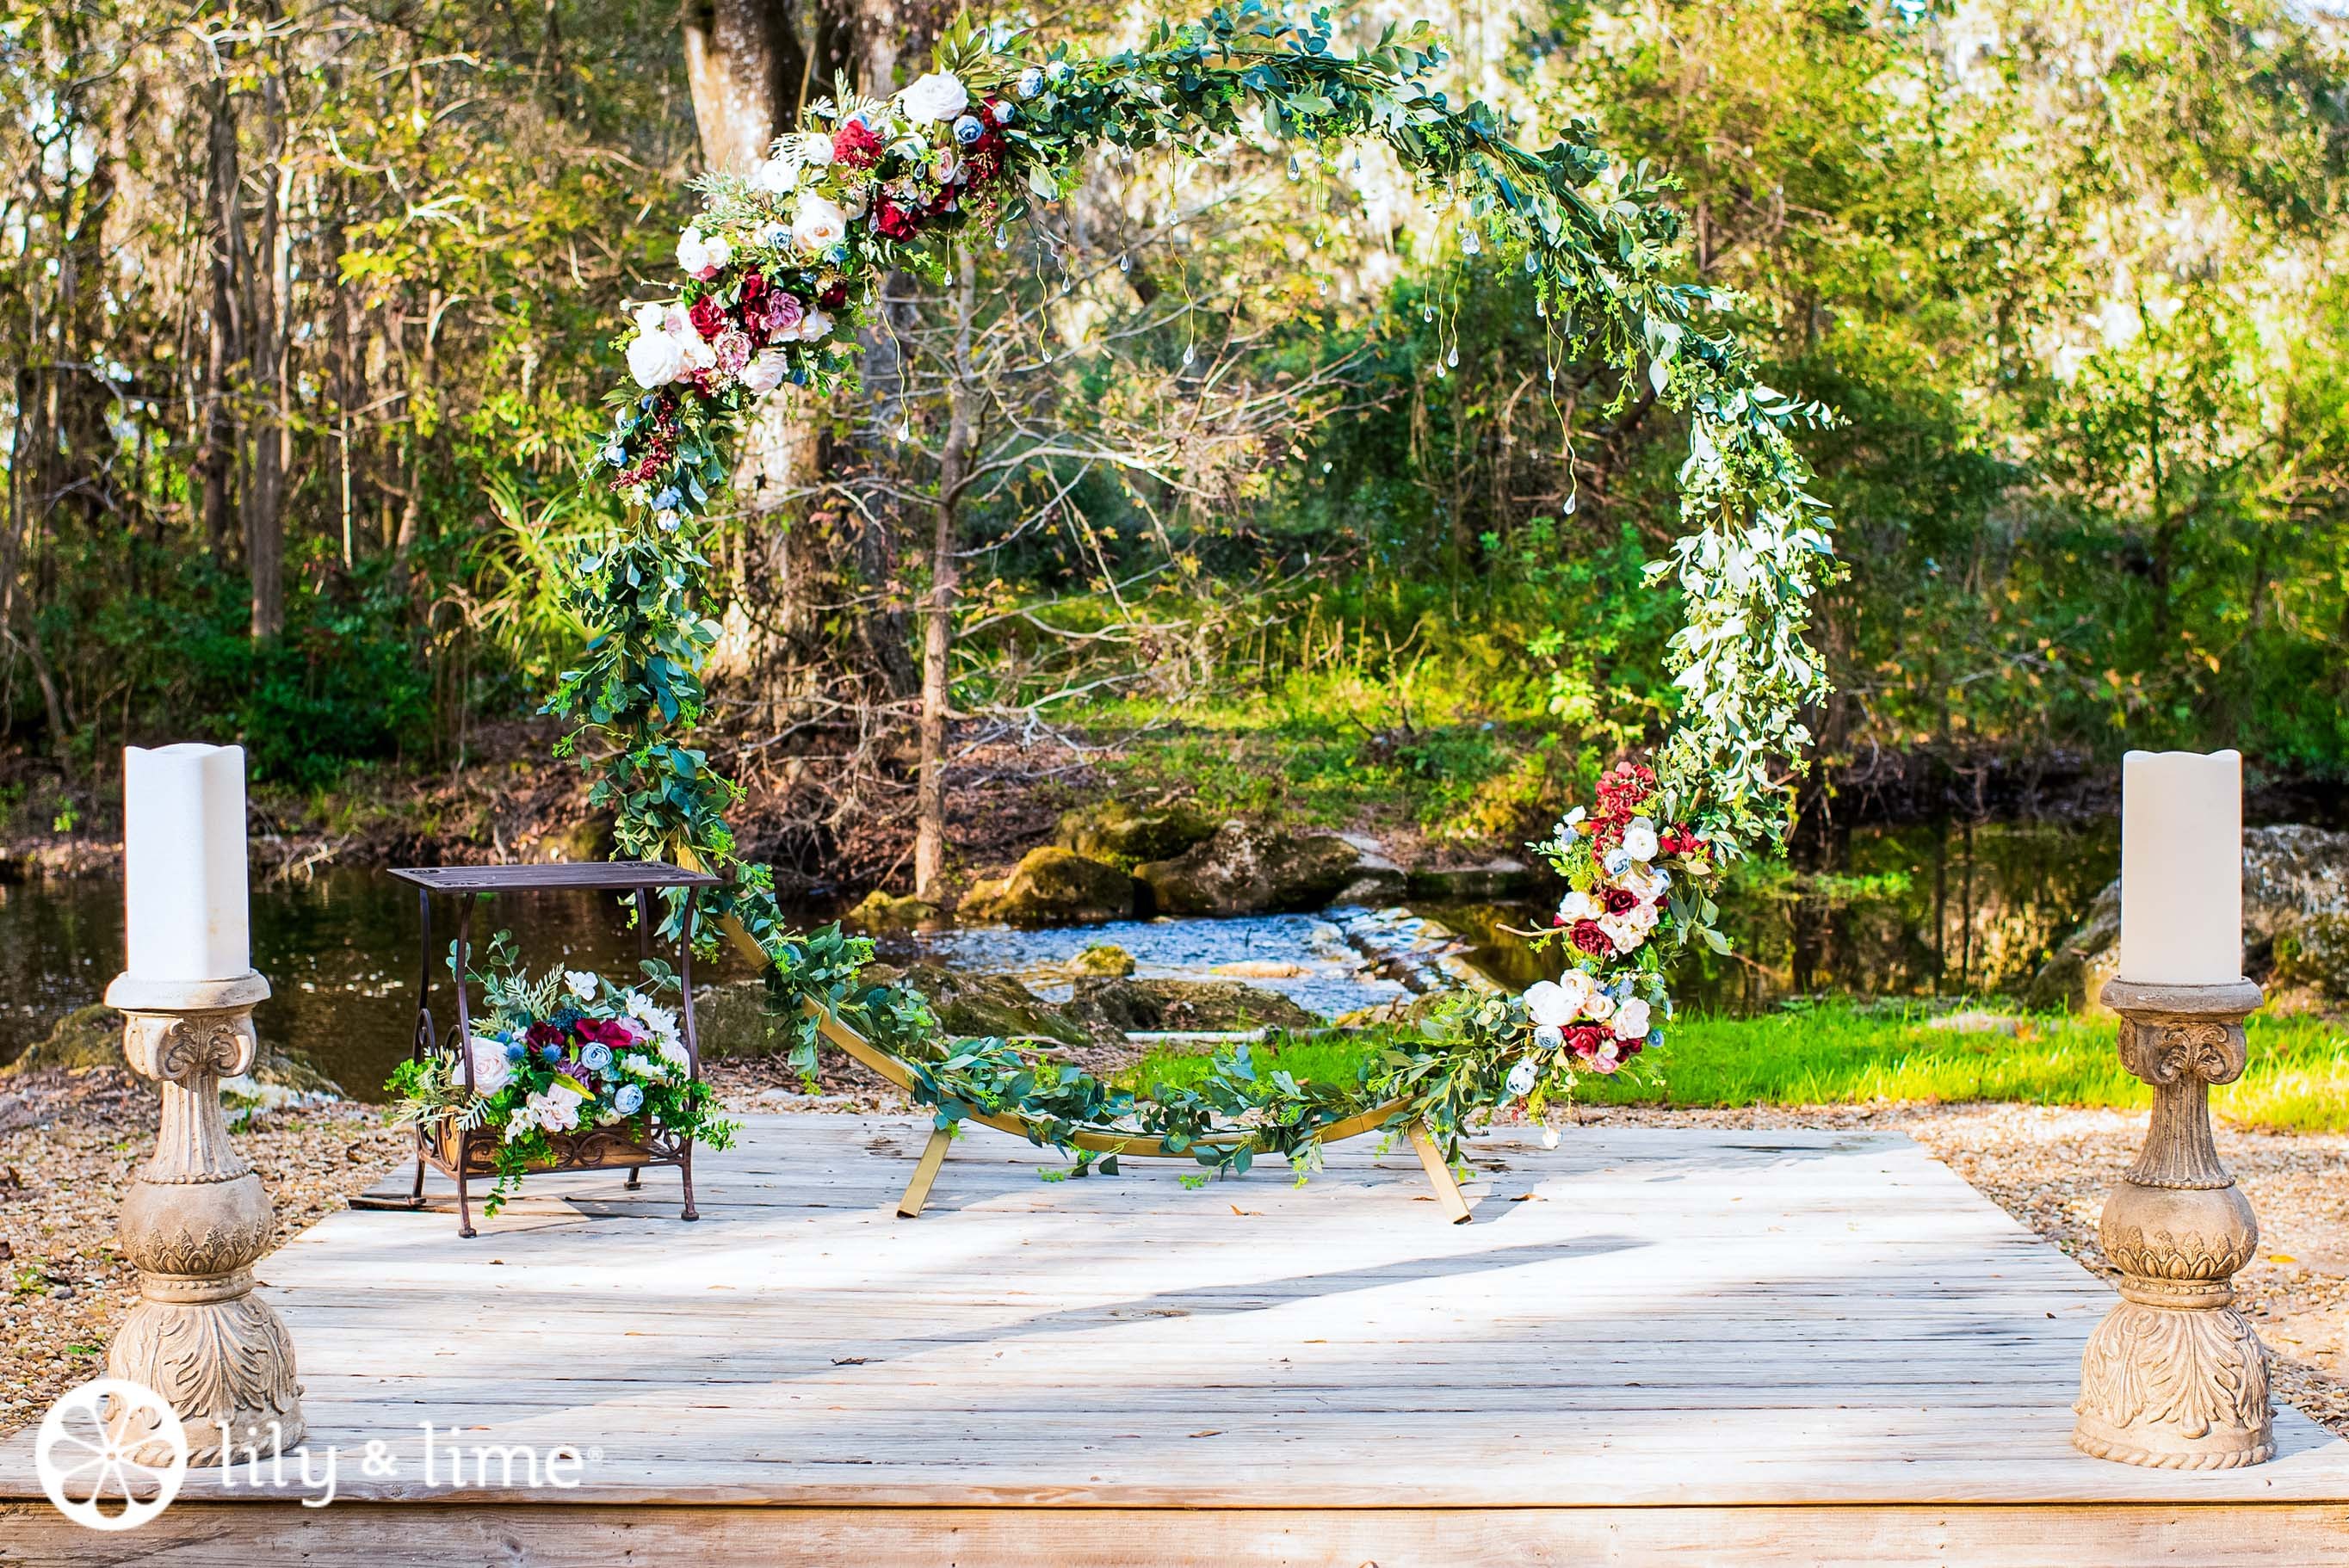 Glass & Mirror Wedding Decor Ideas That Will Make Your Guest Say